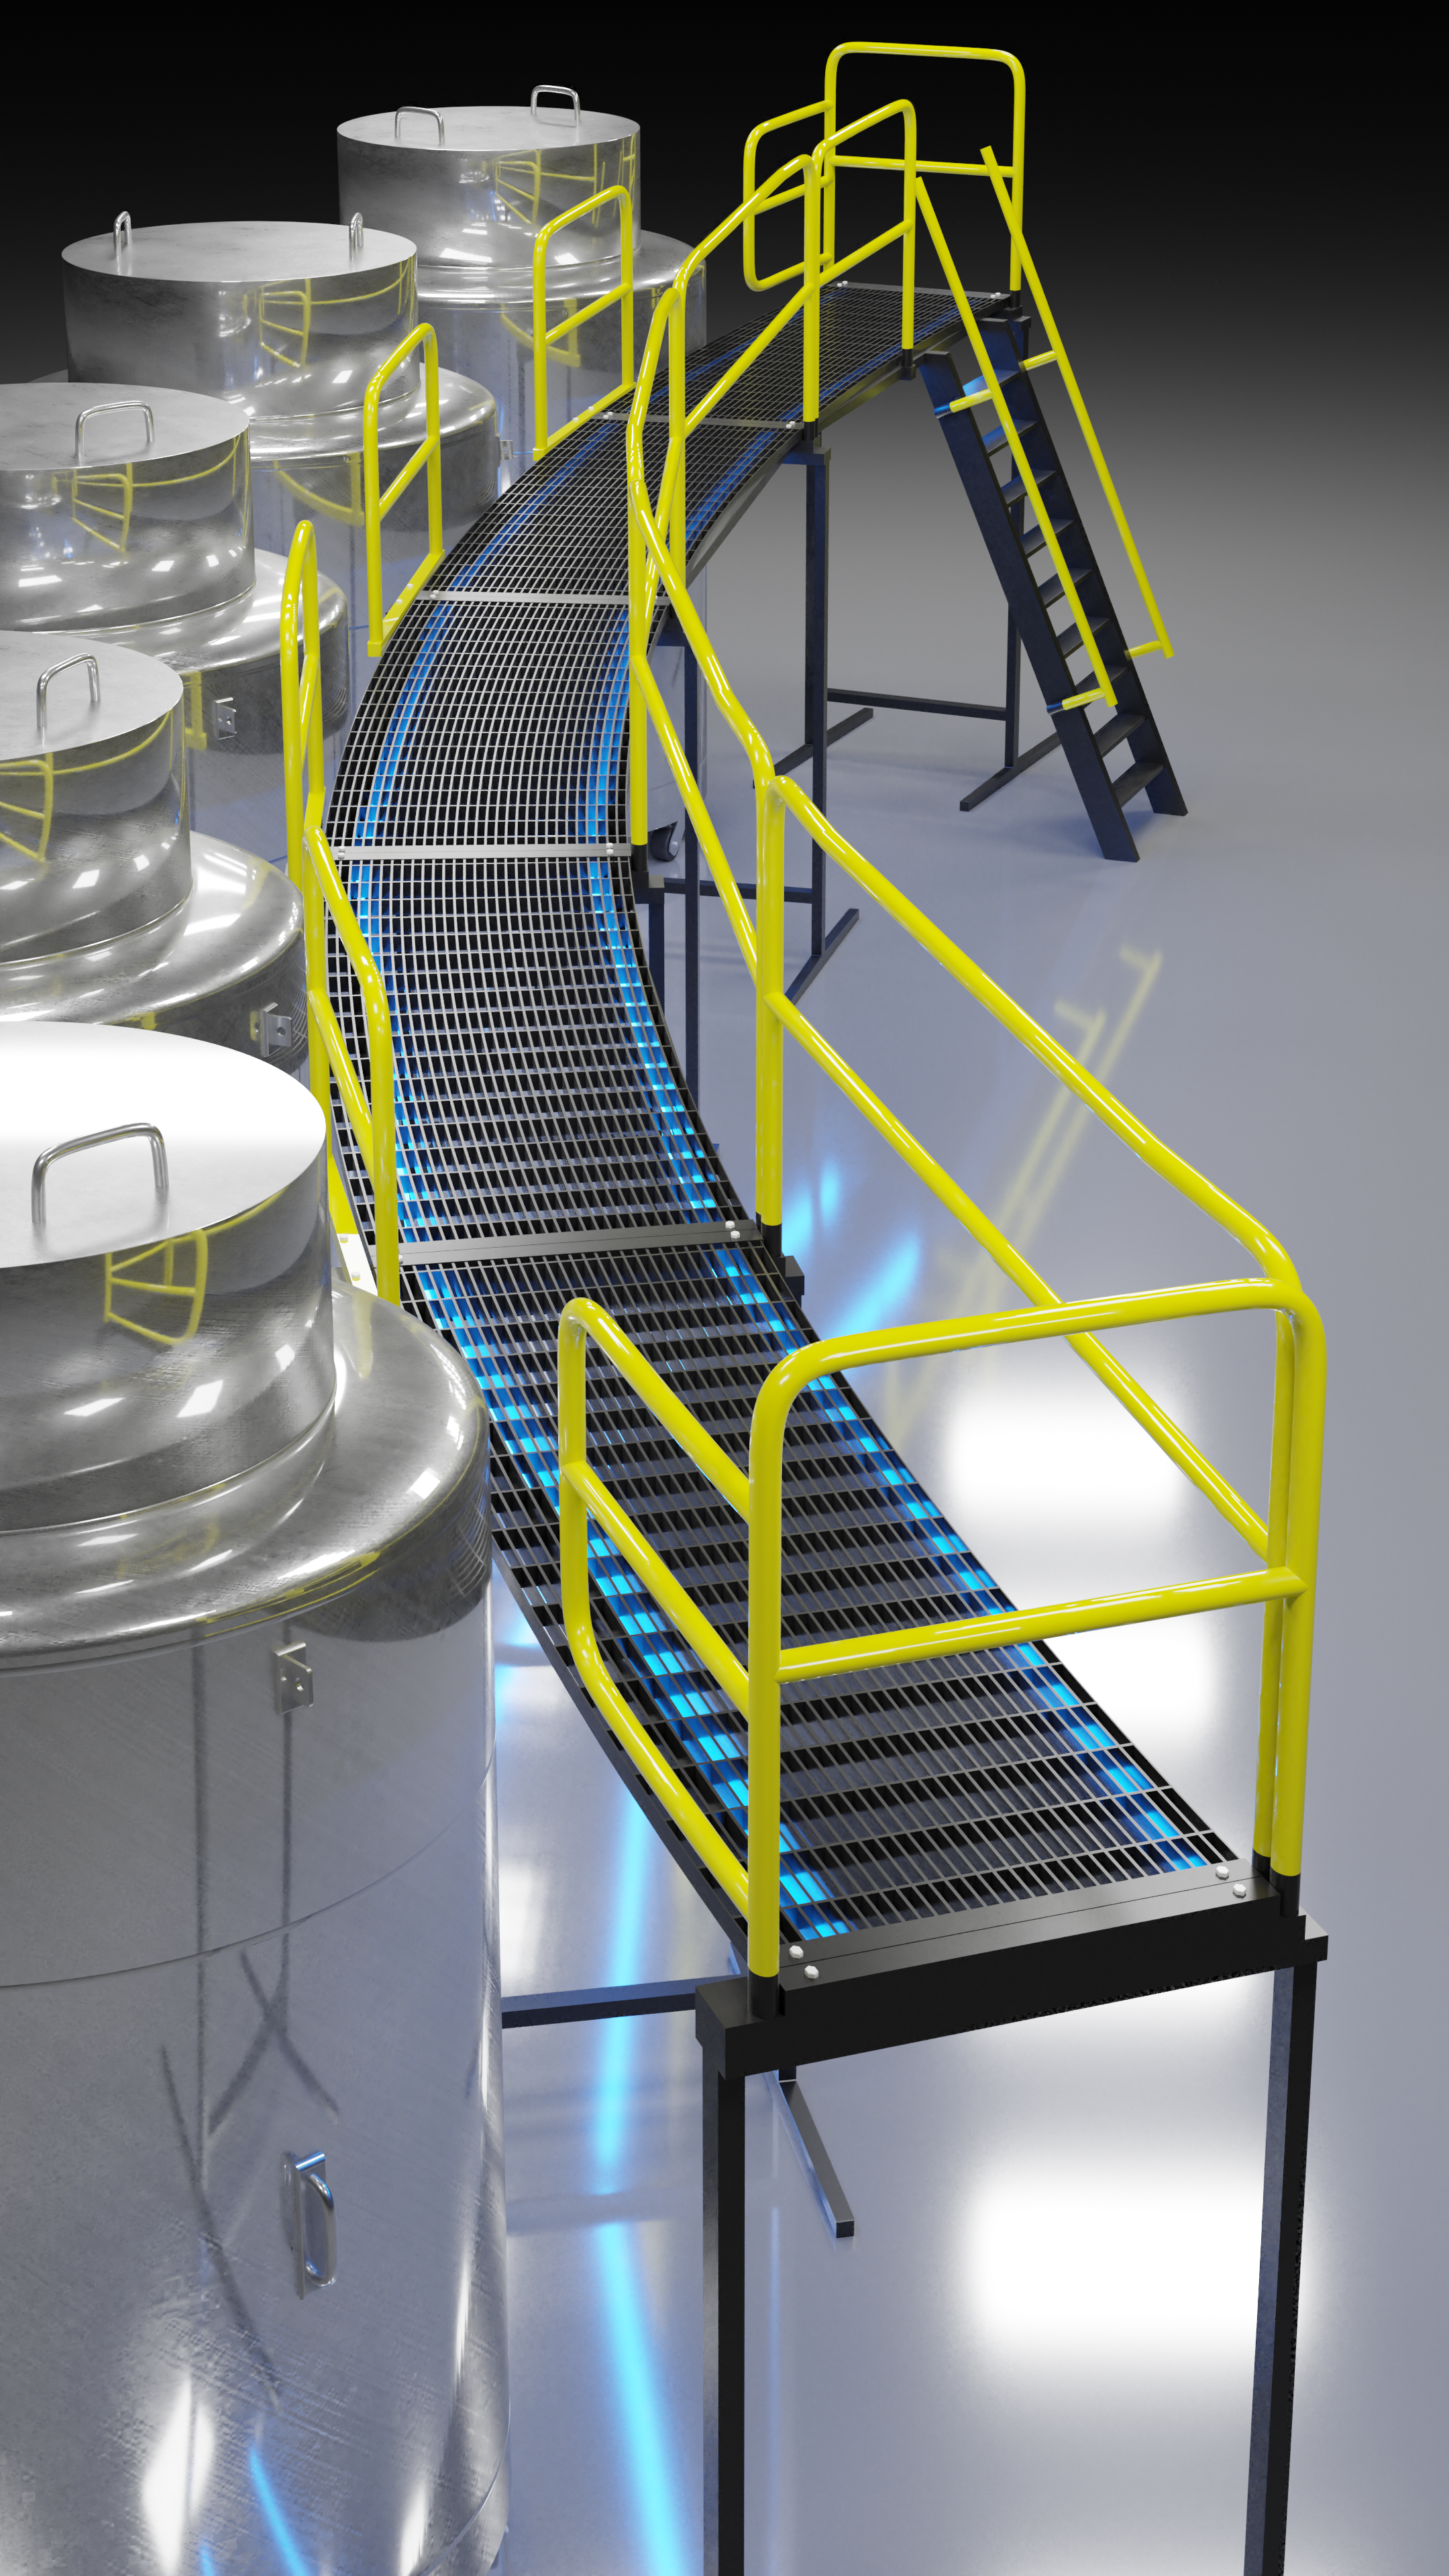 Cryonics Cryonics Cryonics Institute Cryonics 3D Graphics Blender Warehouse Facility Ladder Scaffold 2160x3840